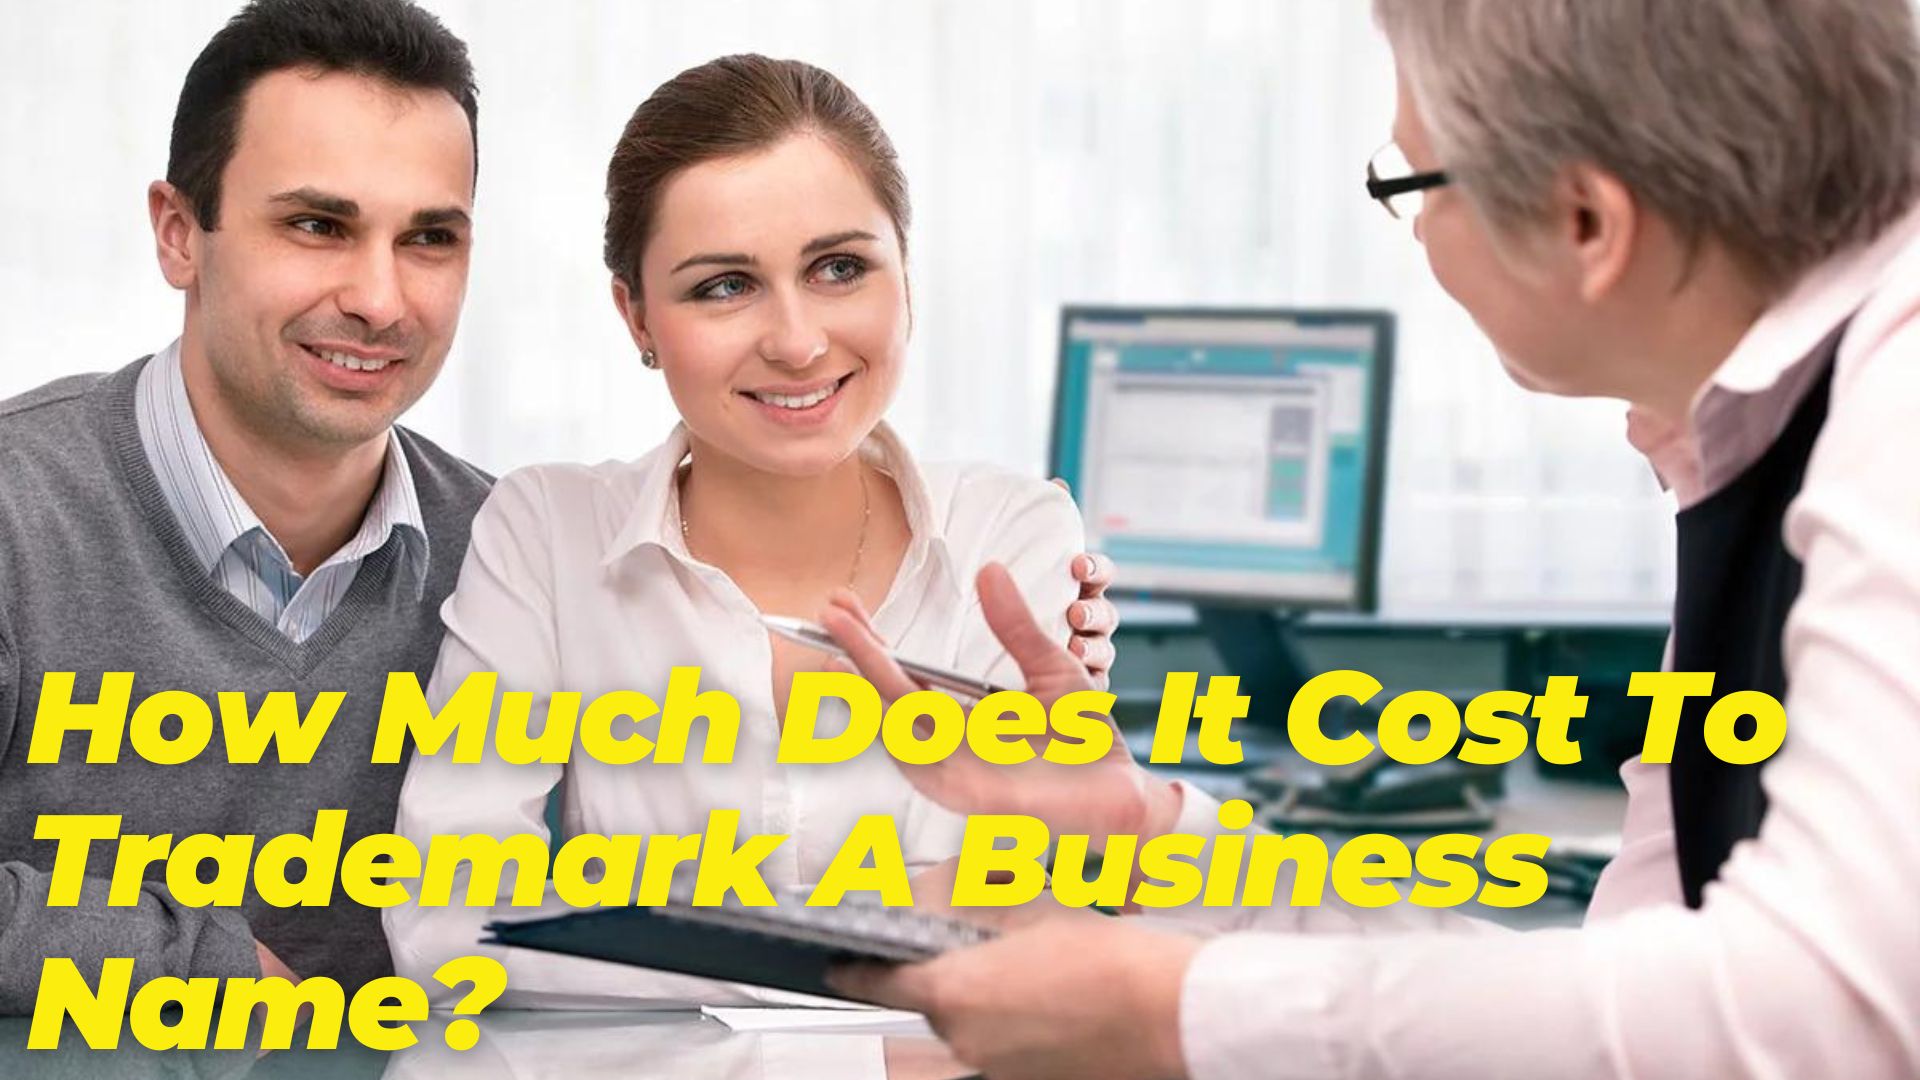 How Much Does It Cost To Trademark A Business Name?